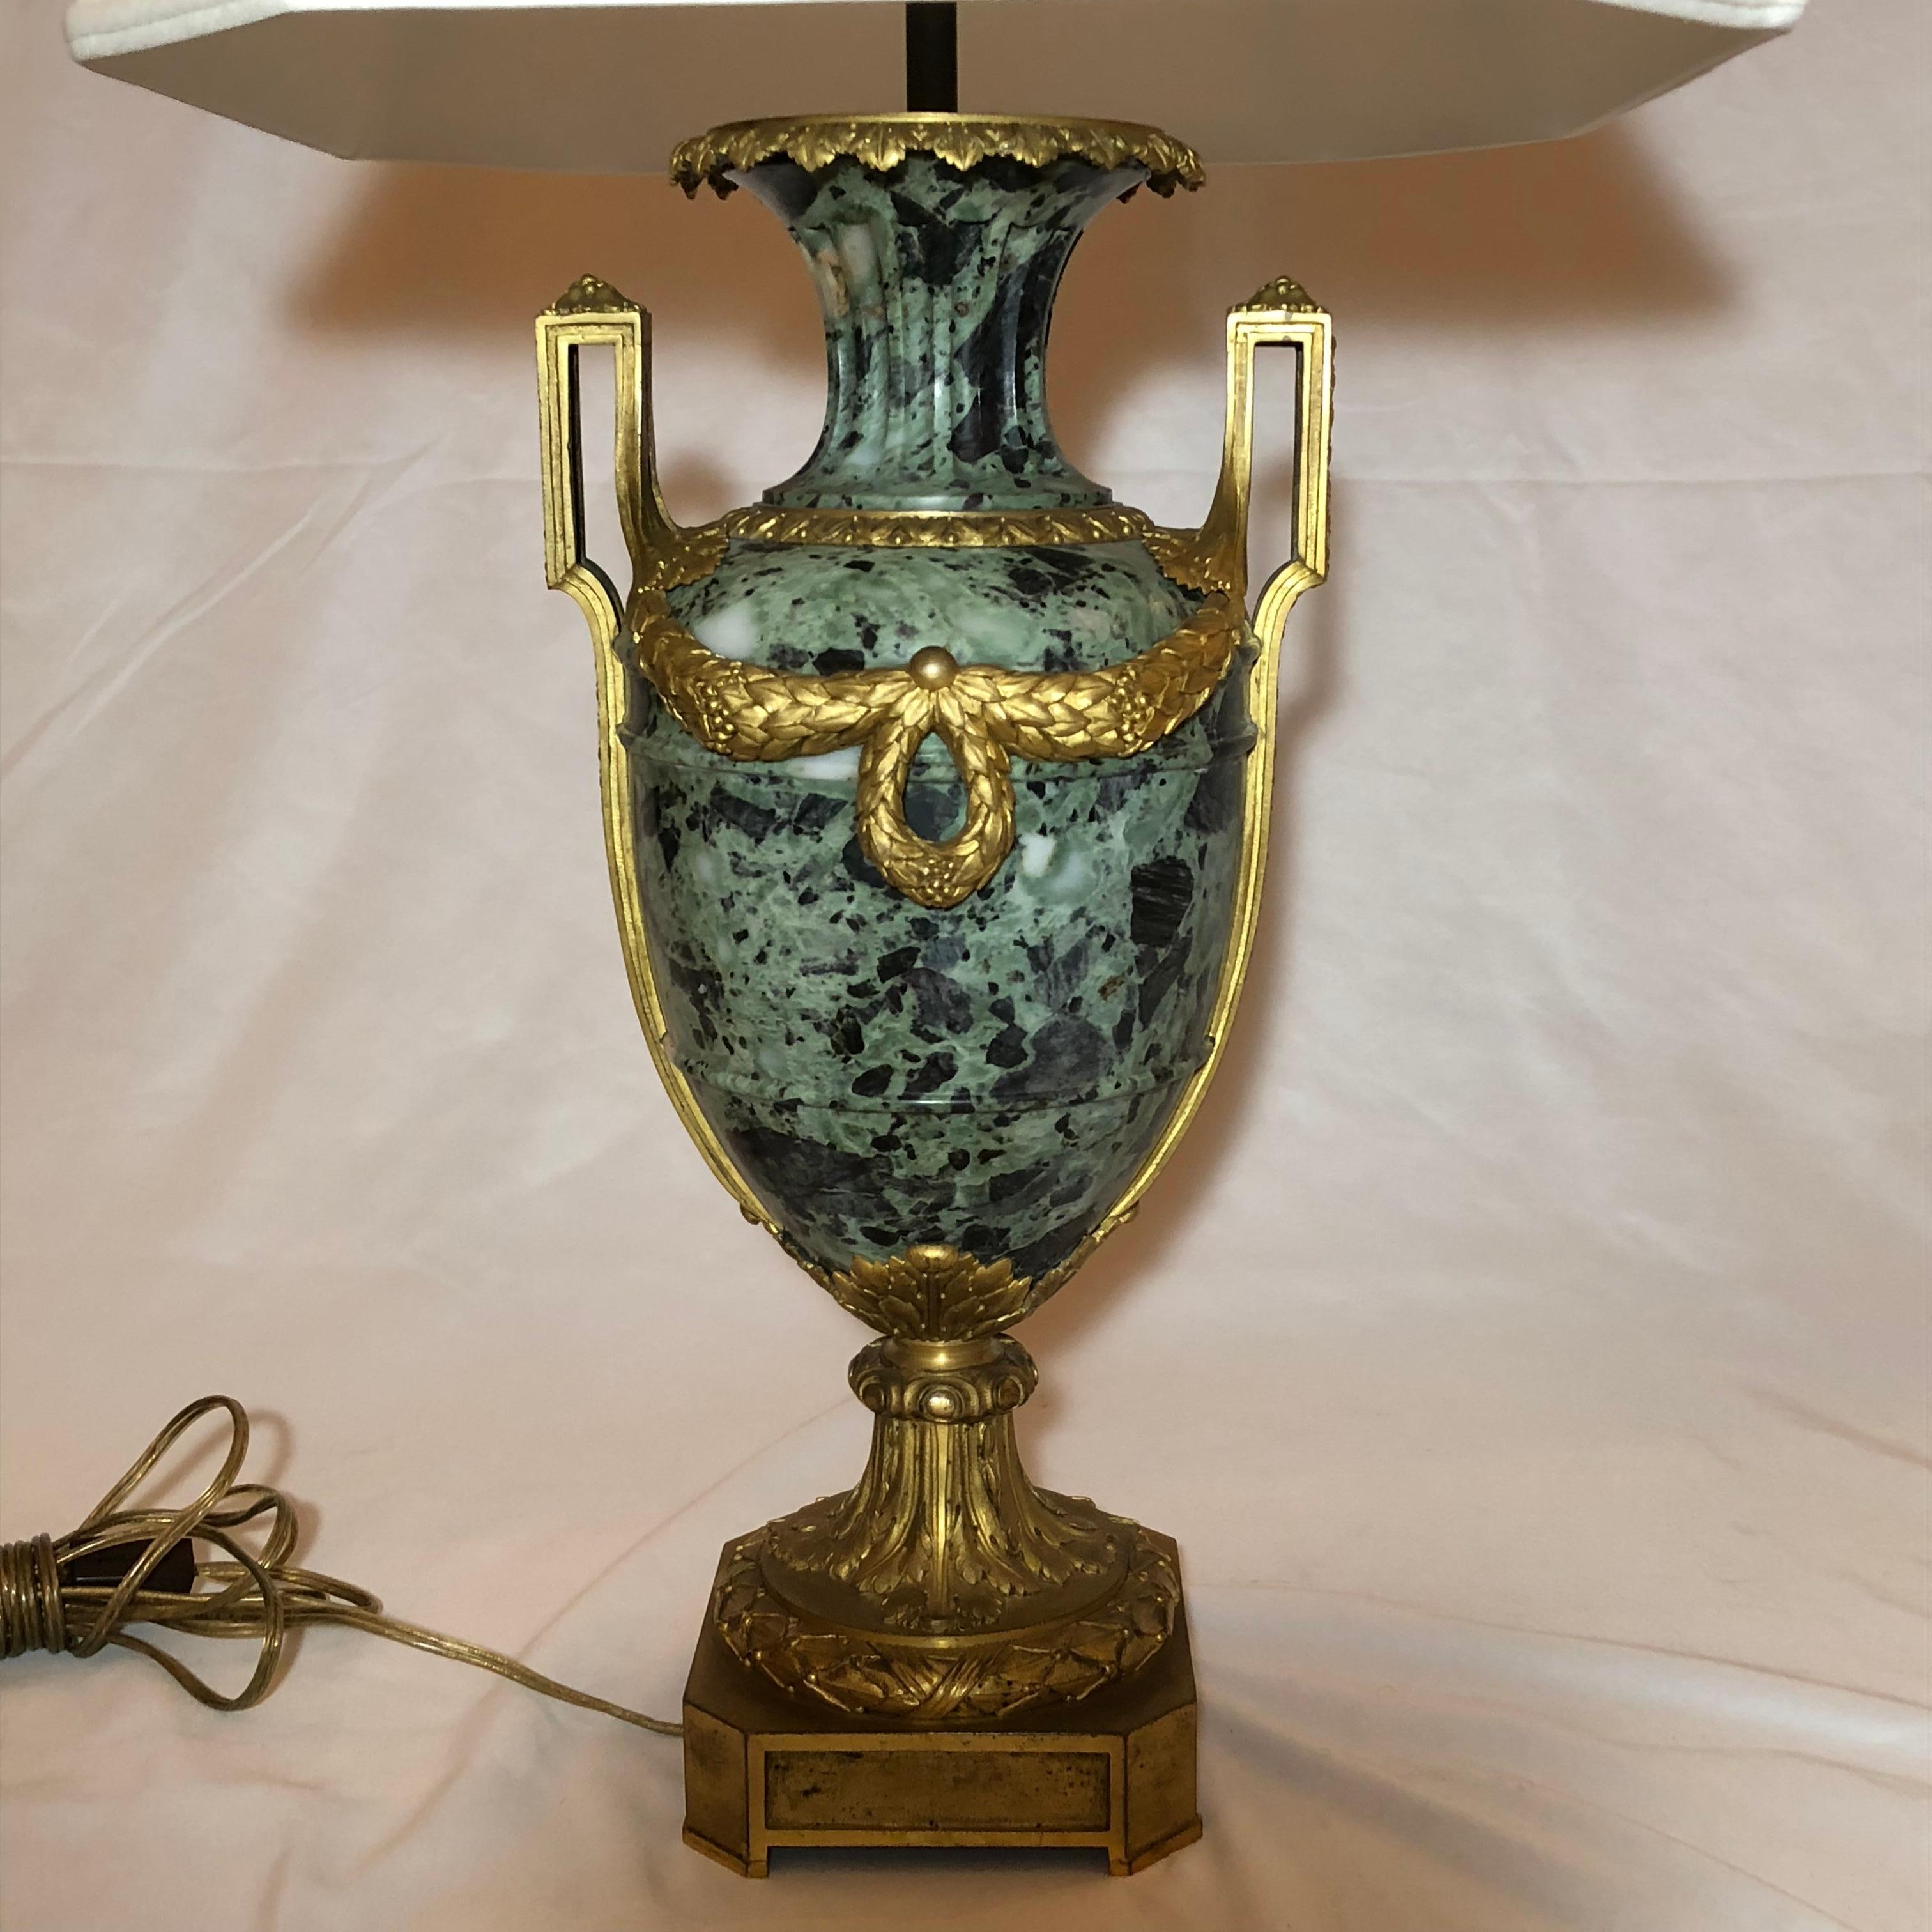 Antique French Verde marble and ormolu lamps, circa 1850-1860.